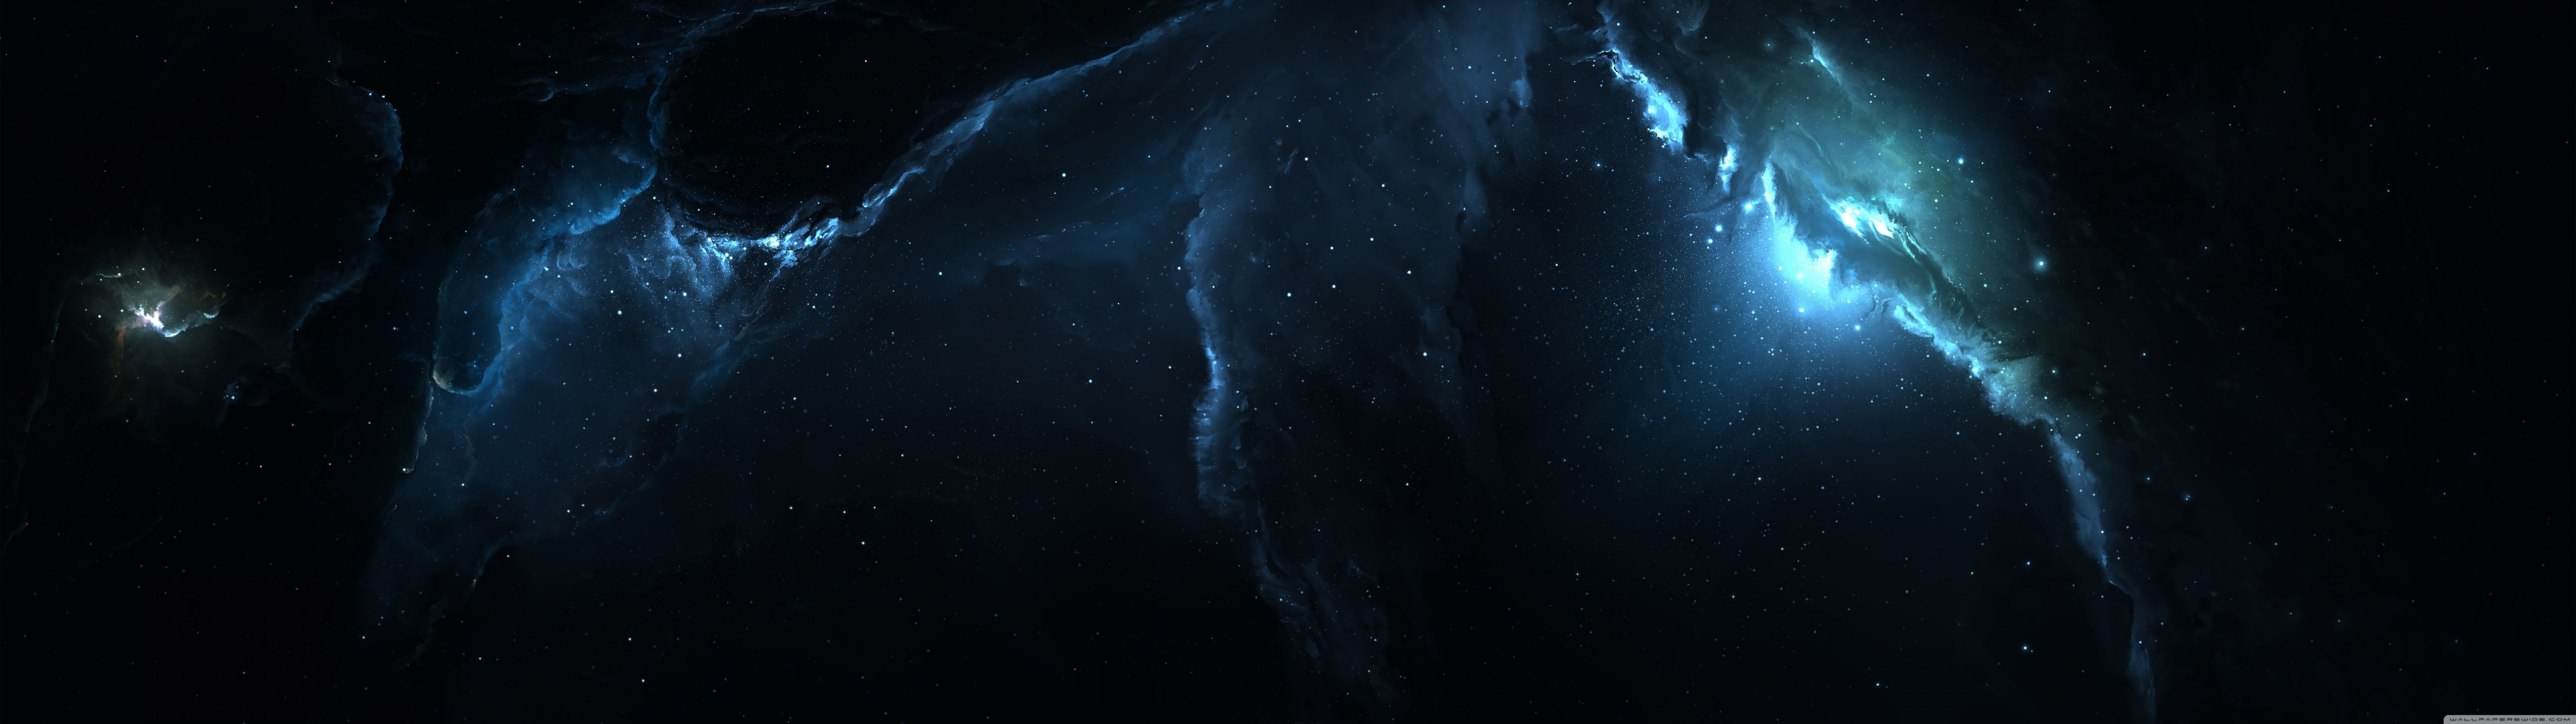 New 7680 X 1440 Wallpaper FULL HD 1920×1080 For PC Background